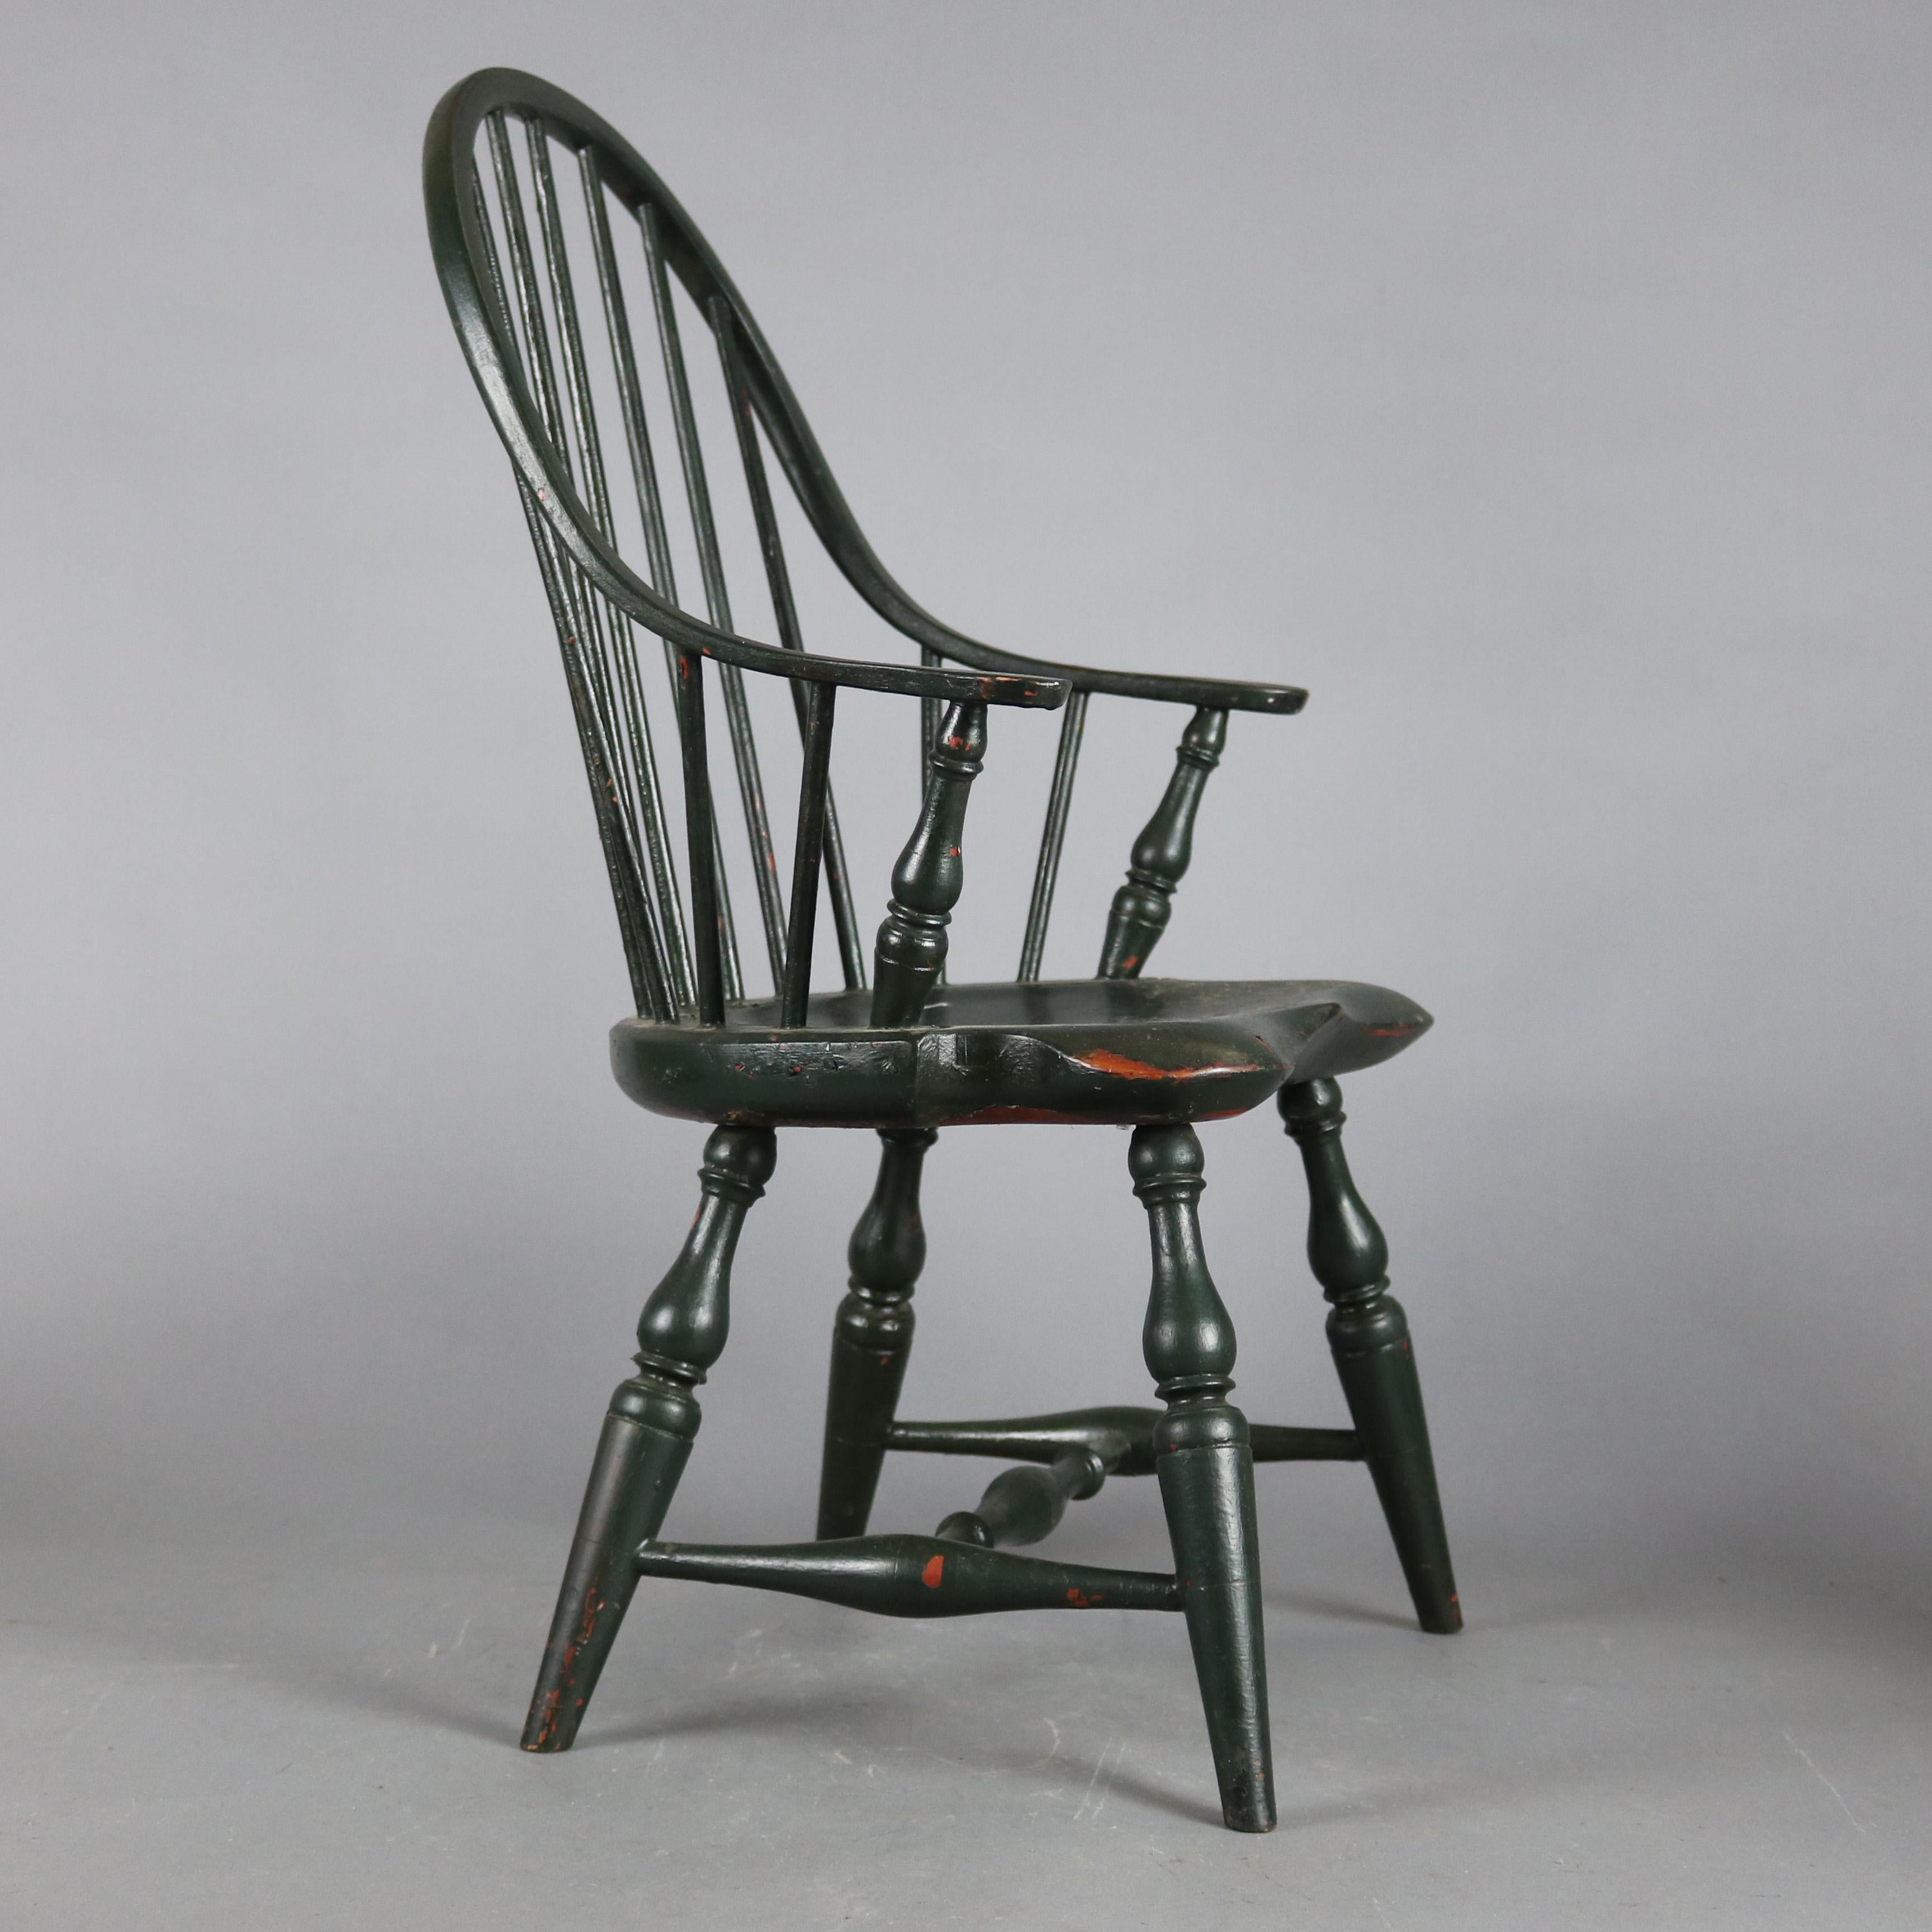 English Antique Grain Painted Continuous Arm Bow Back Windsor Childs Chair, 20th Century